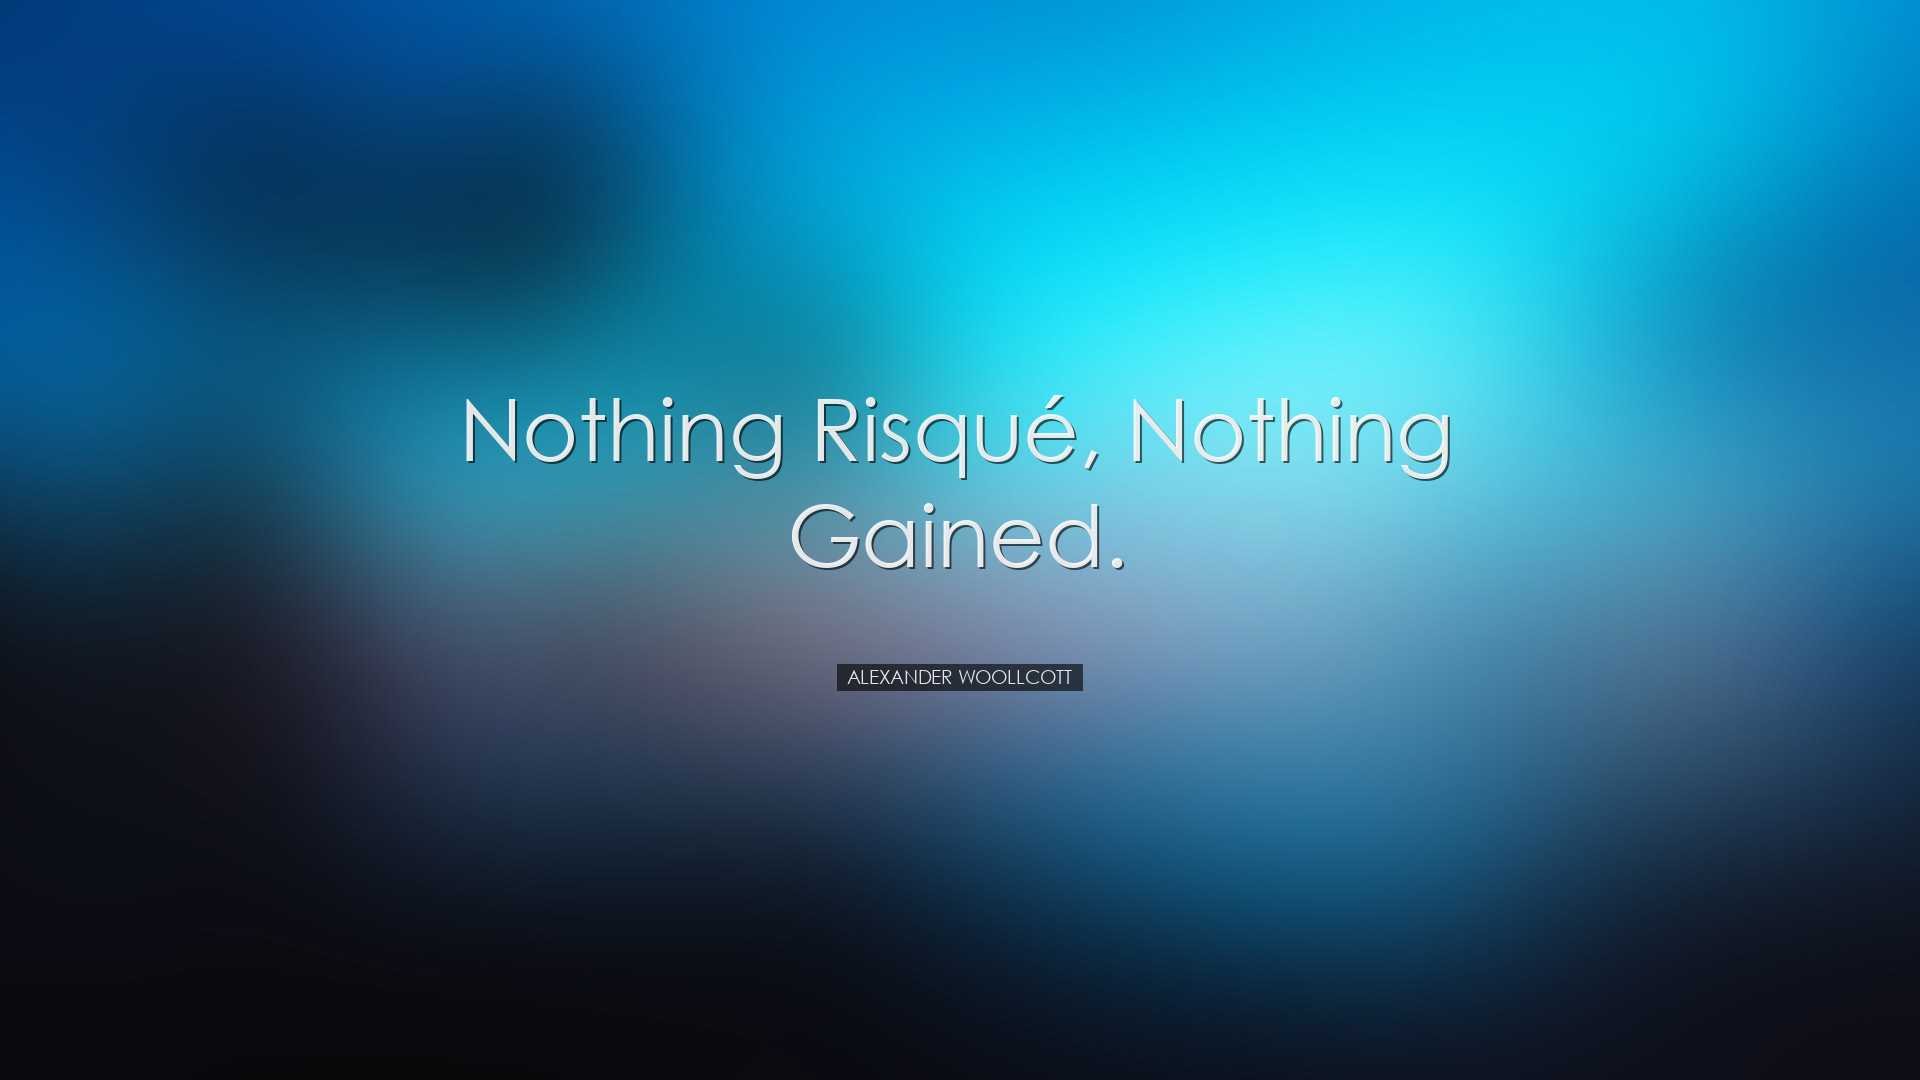 Nothing risquÃ©, nothing gained. - Alexander Woollcott